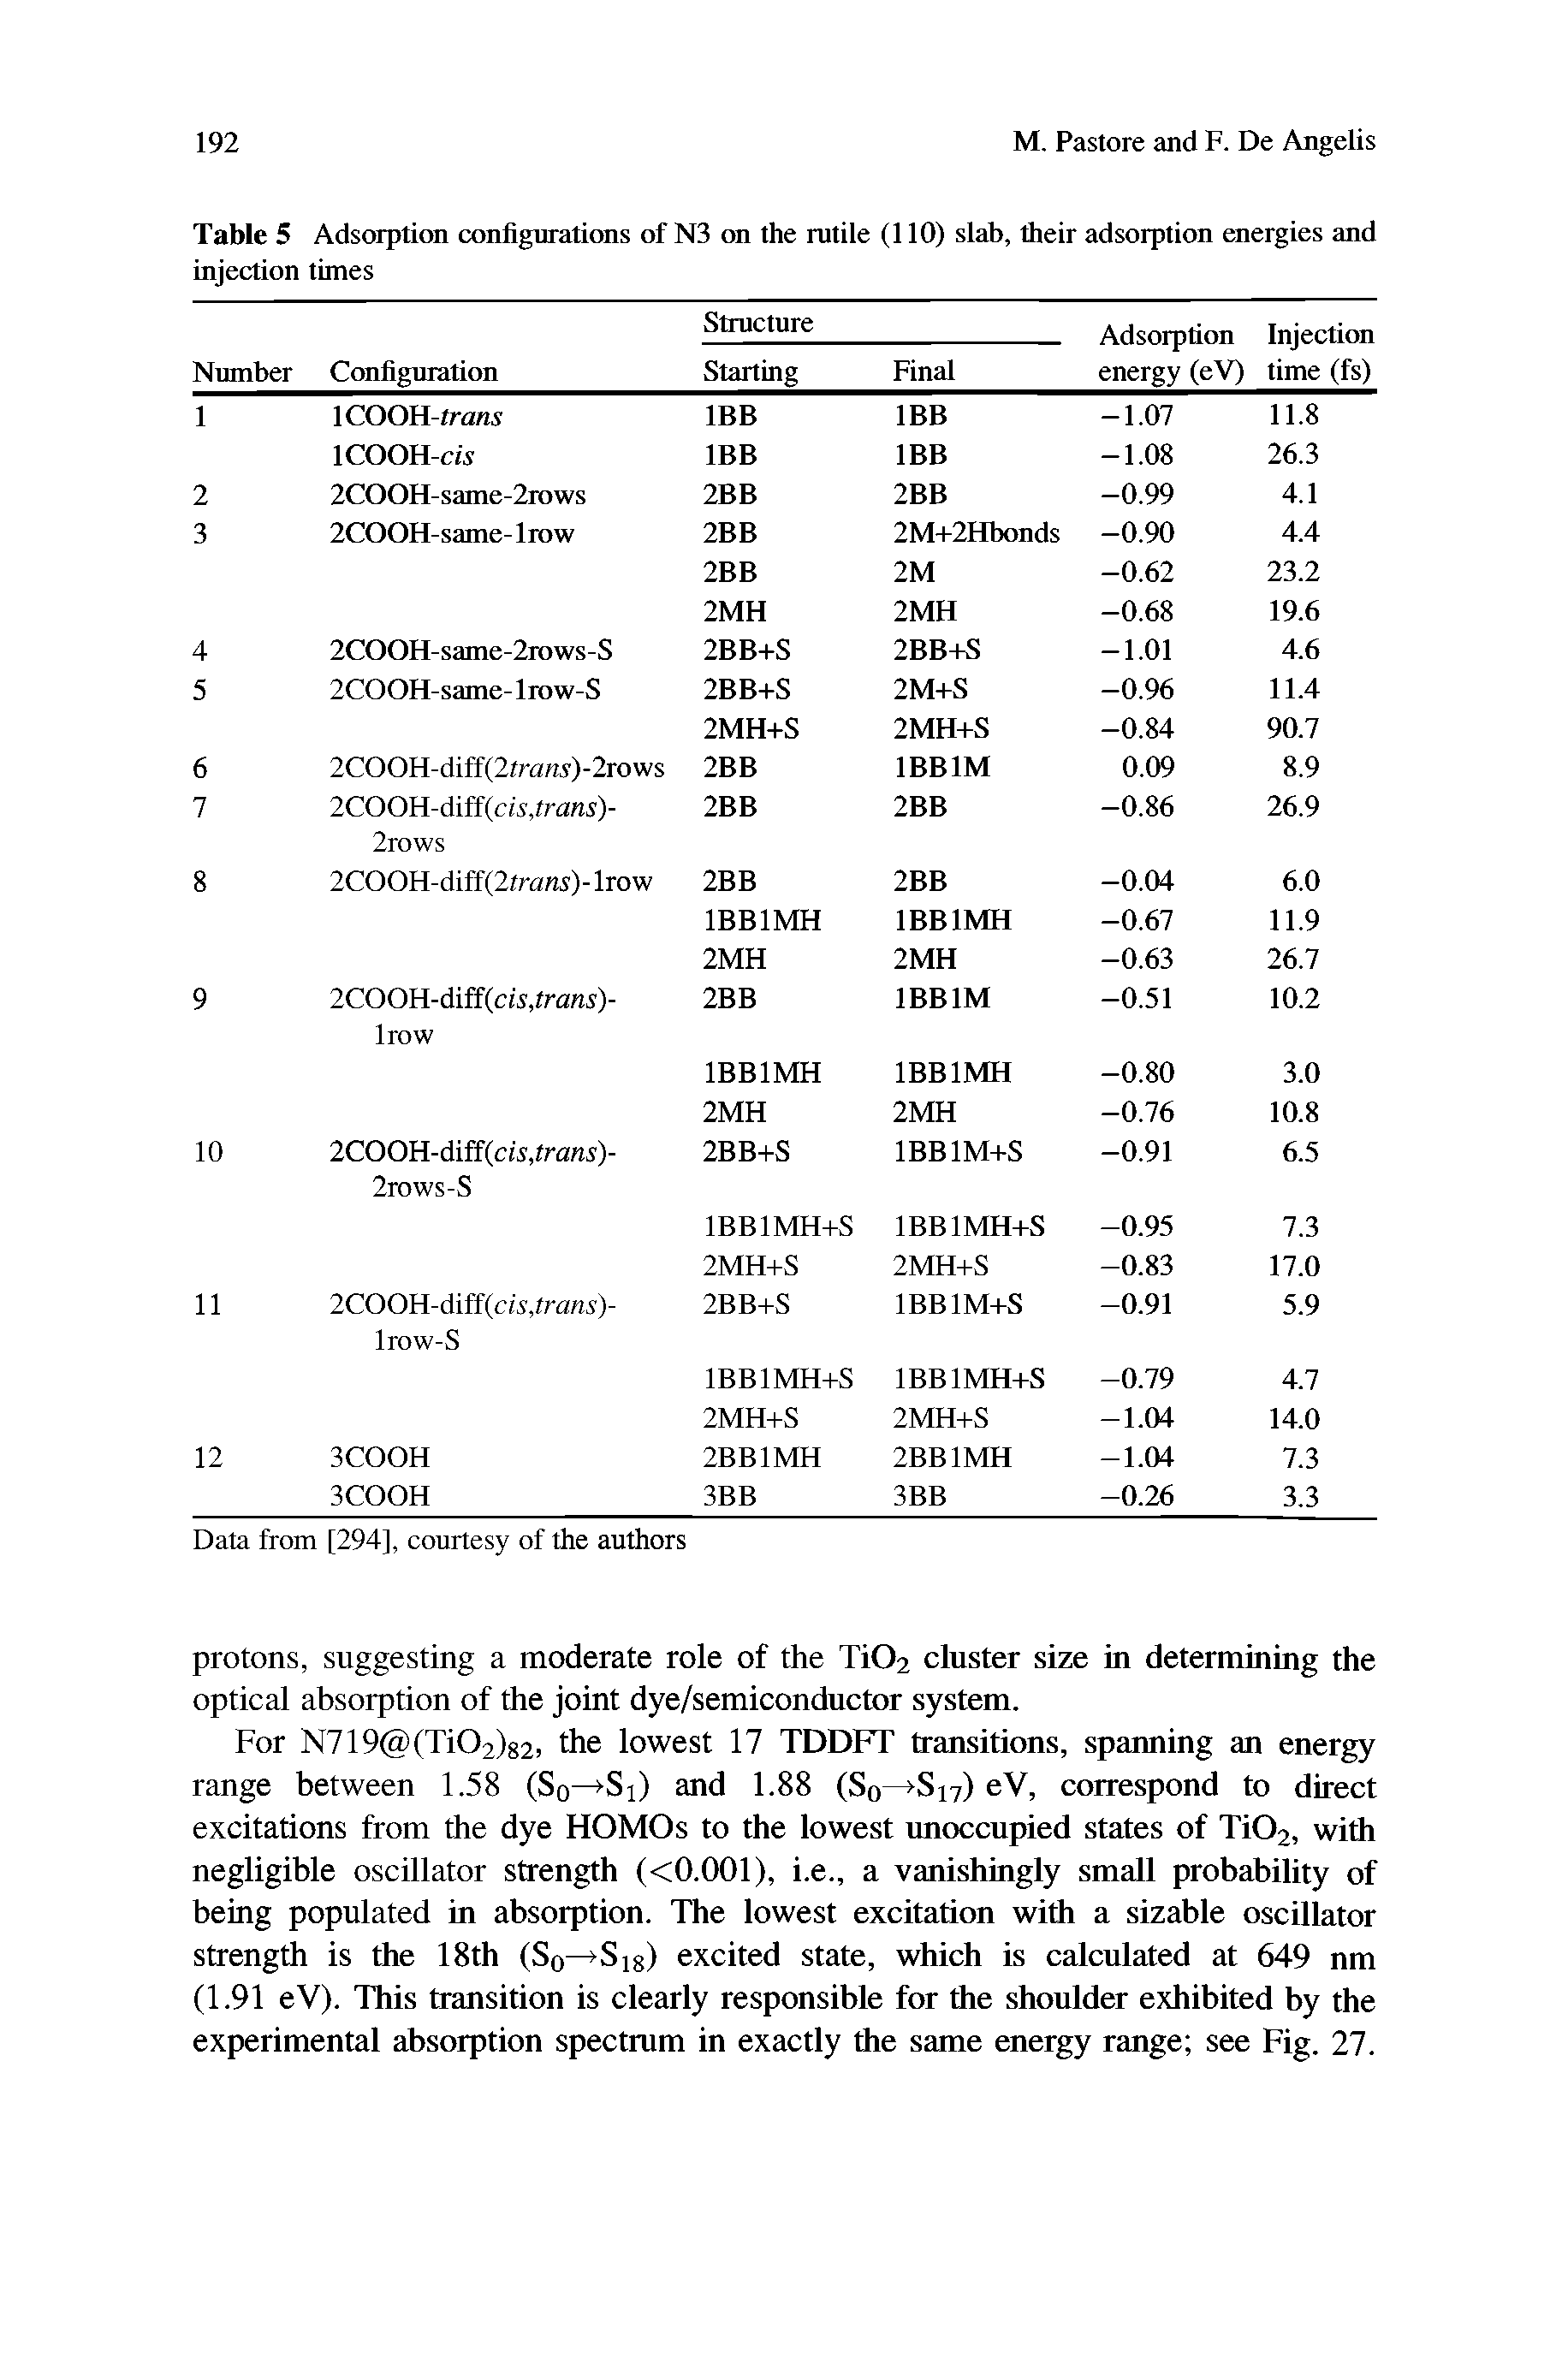 Table 5 Adsorption configurations of N3 on the rutile (110) slab, their adsorption energies and injection times...